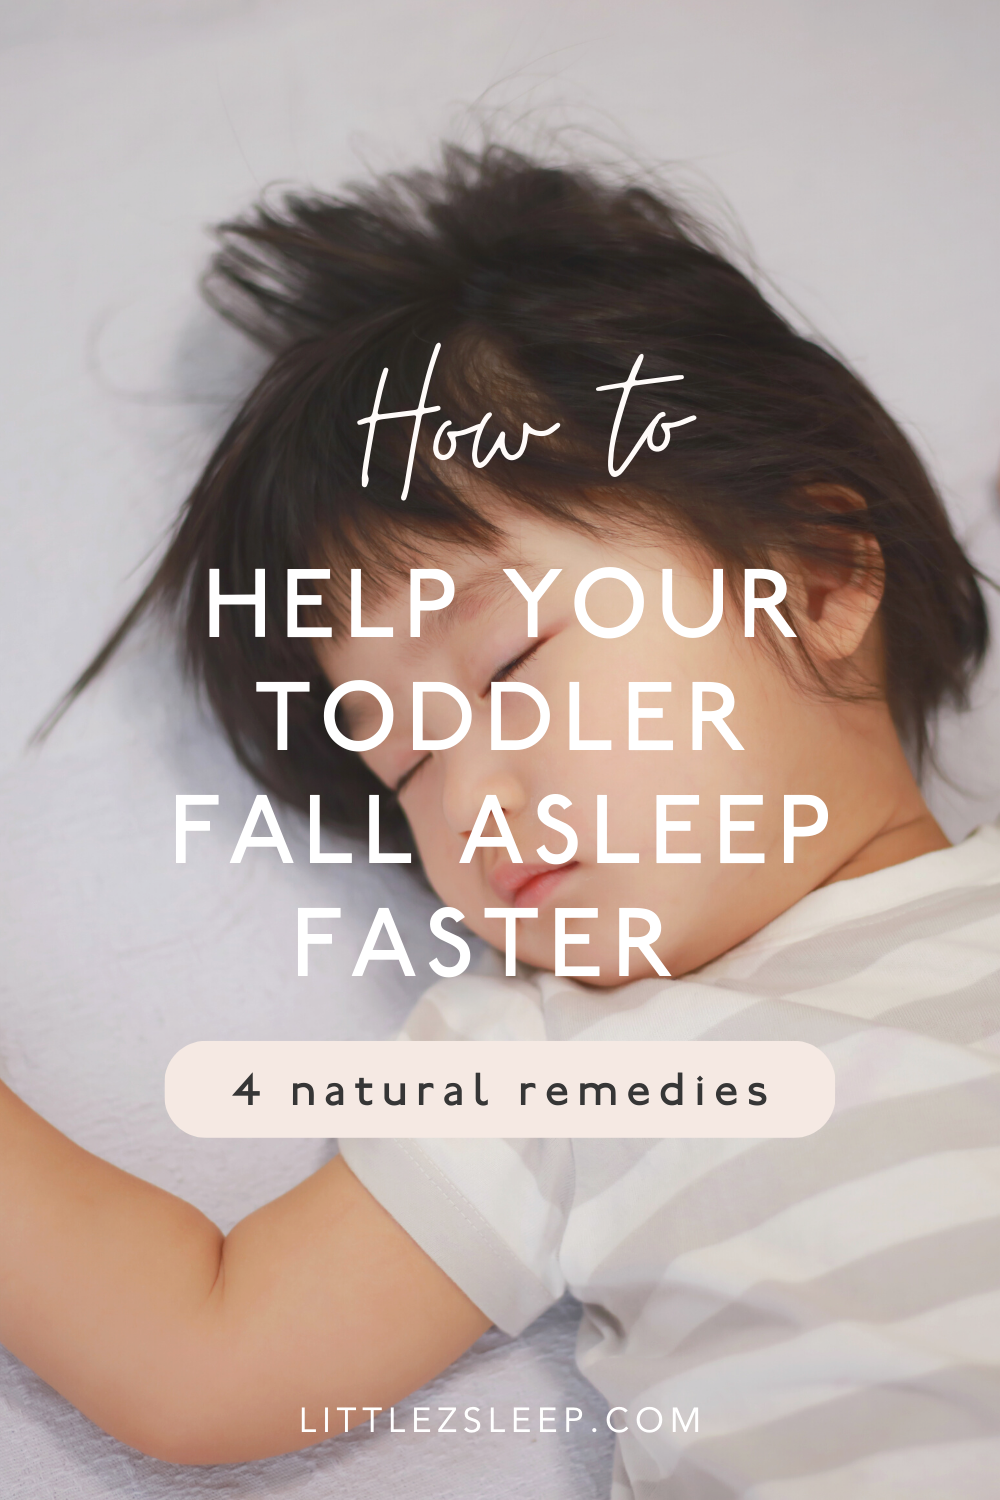 Help your toddler fall asleep faster